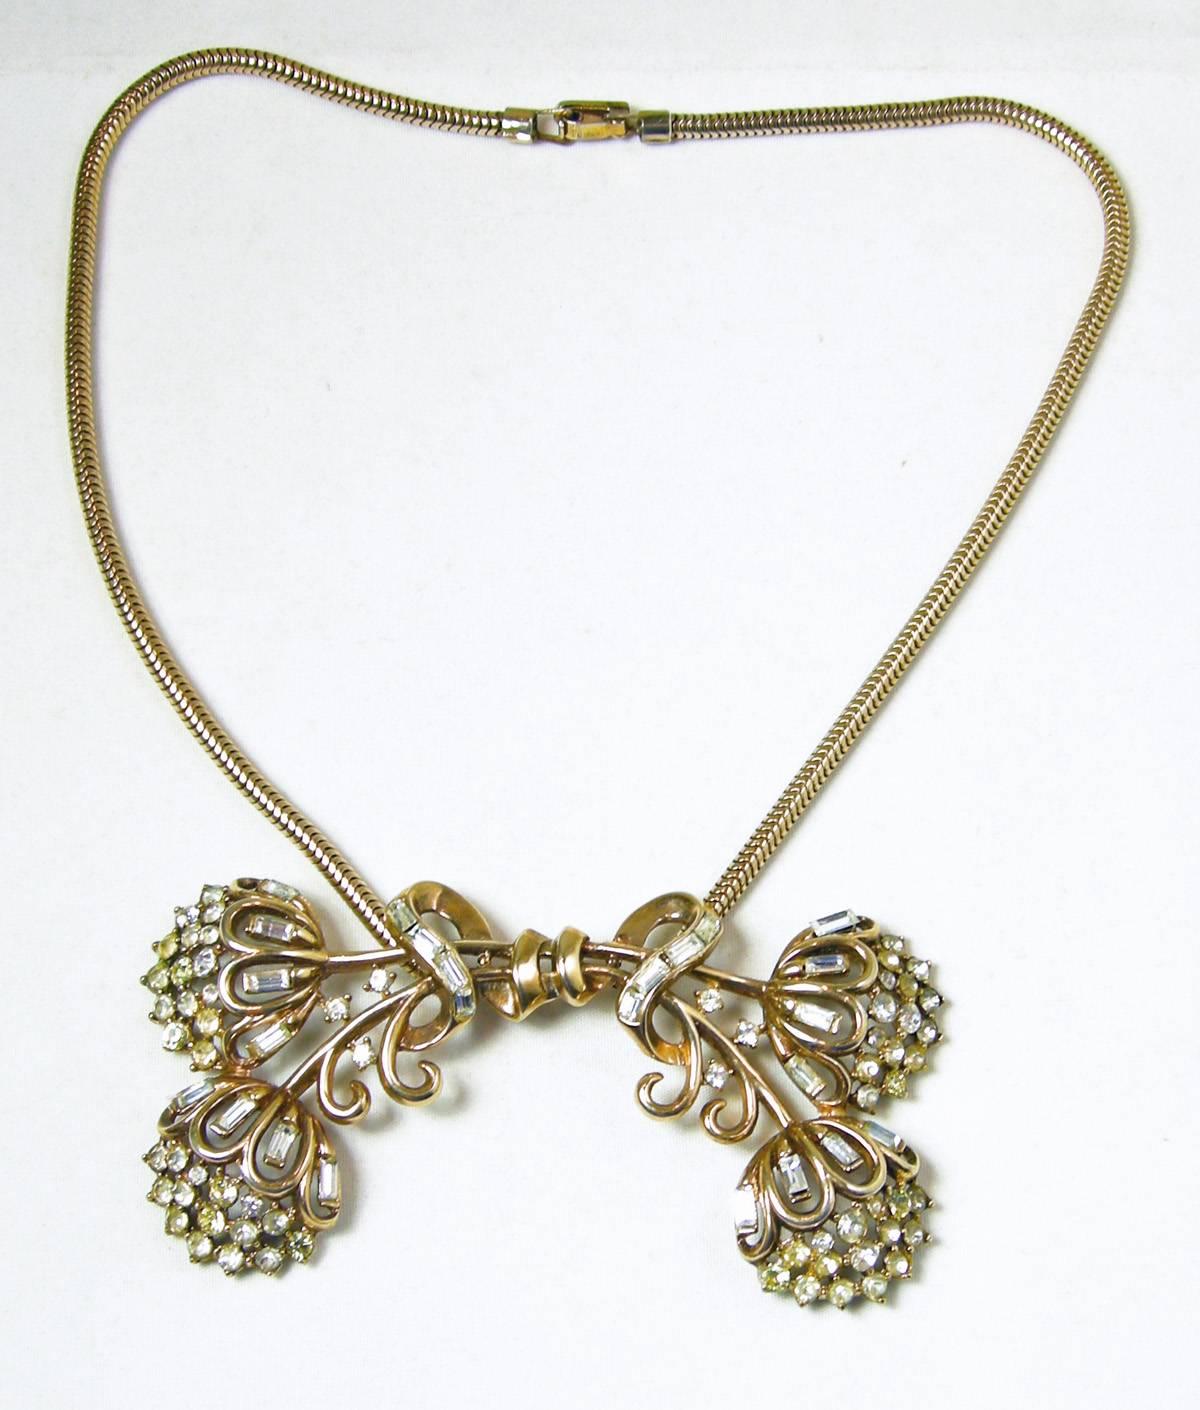 This vintage Trifari necklace is from the 1940s and has an abstract floral bow design accentuated with rhinestones.  It has a gold tone snake chain that is 15” long with a fold over clasp.  The chain leads downward to the centerpiece that measures